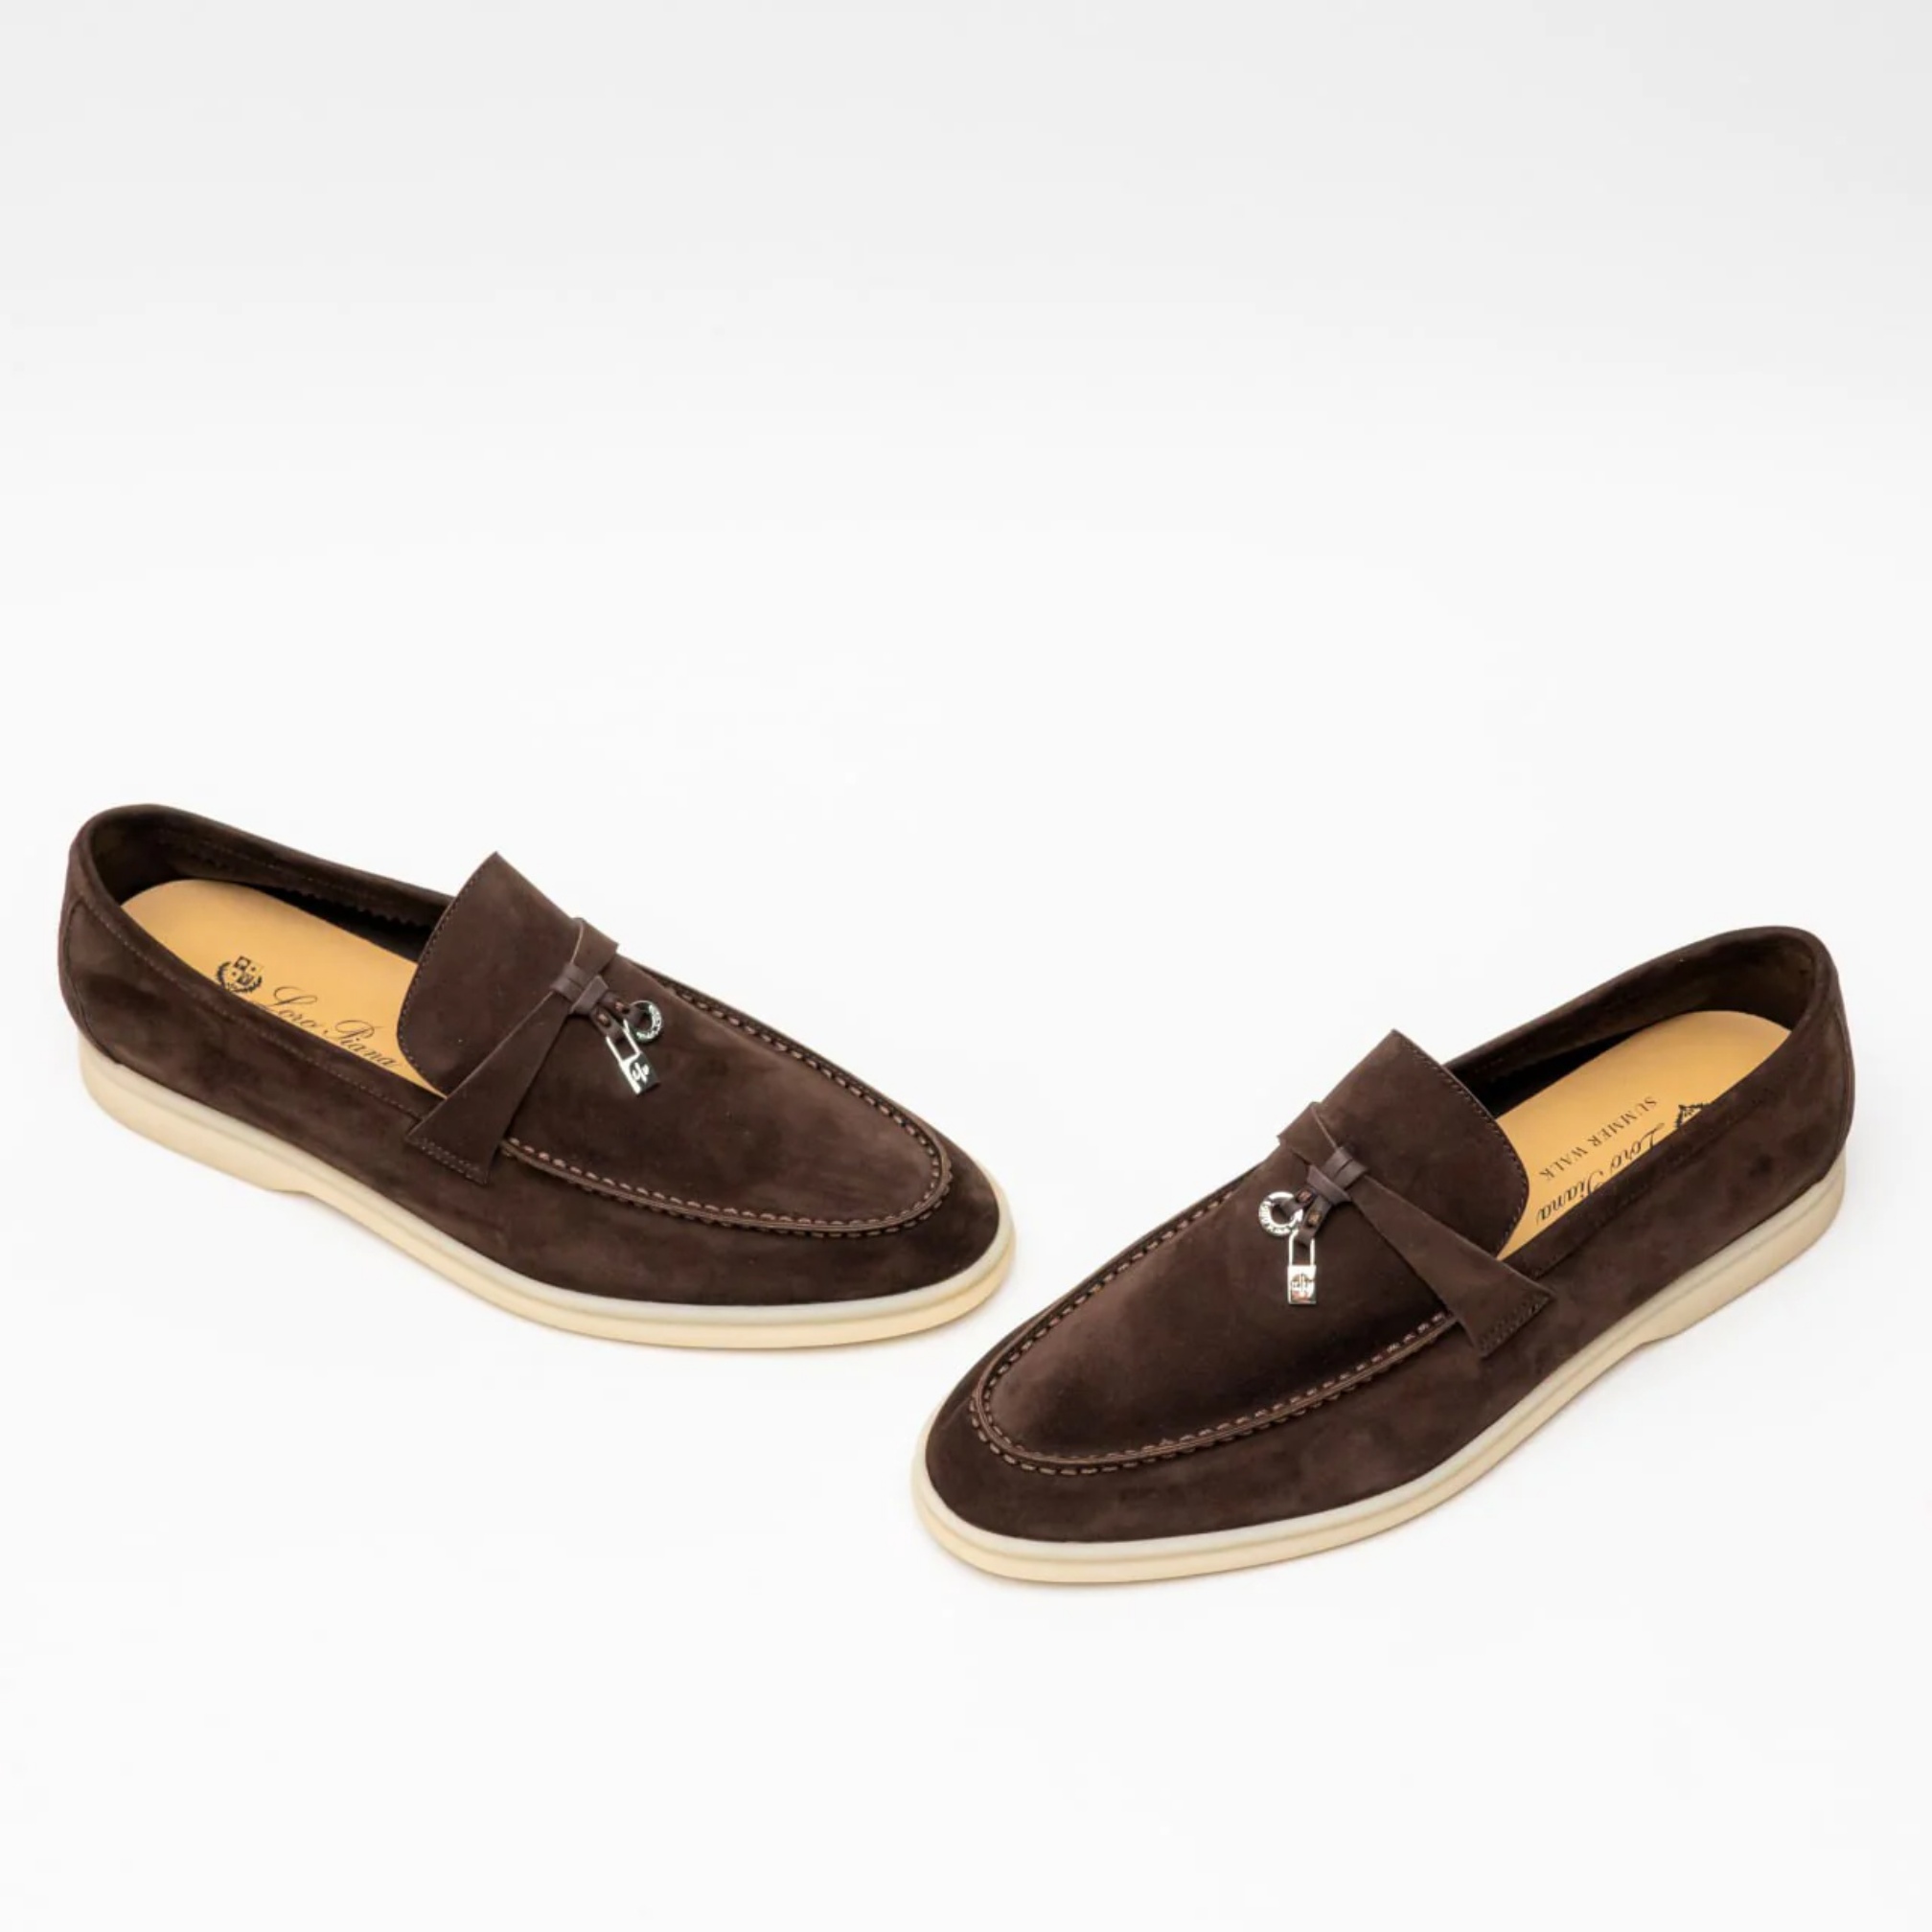 Loro Piana Summer Charms Walk Loafers Suede Chocolate